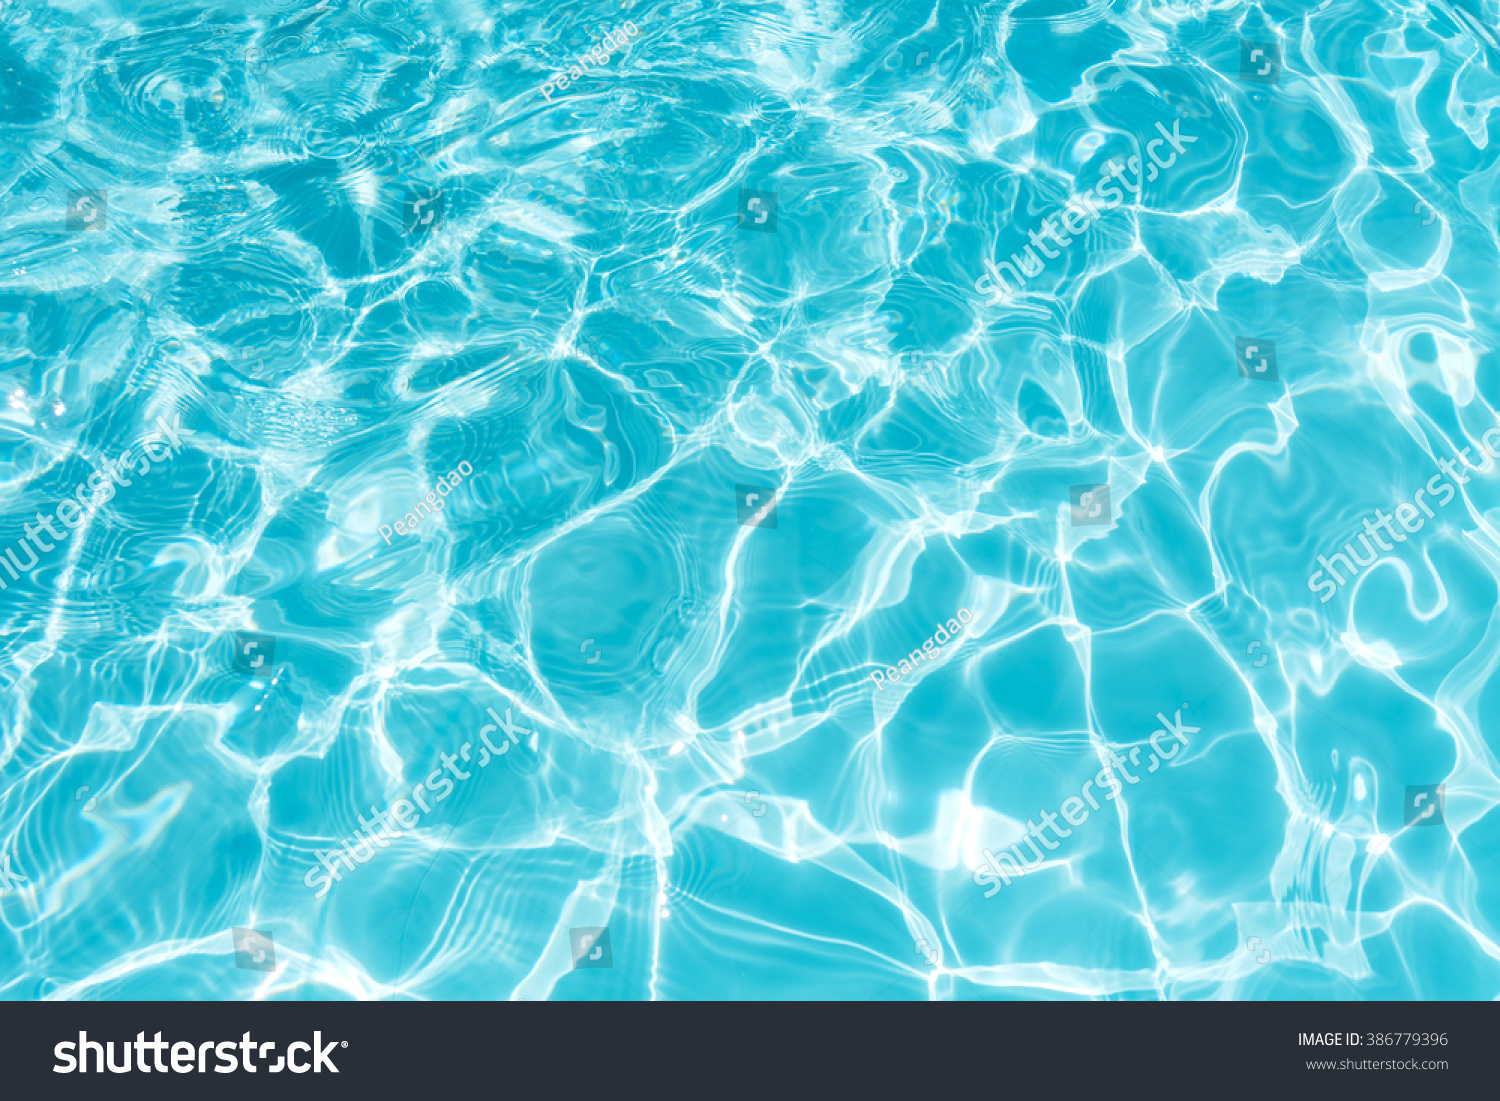 Ripple Water in swimming pool with sun reflection #386779396